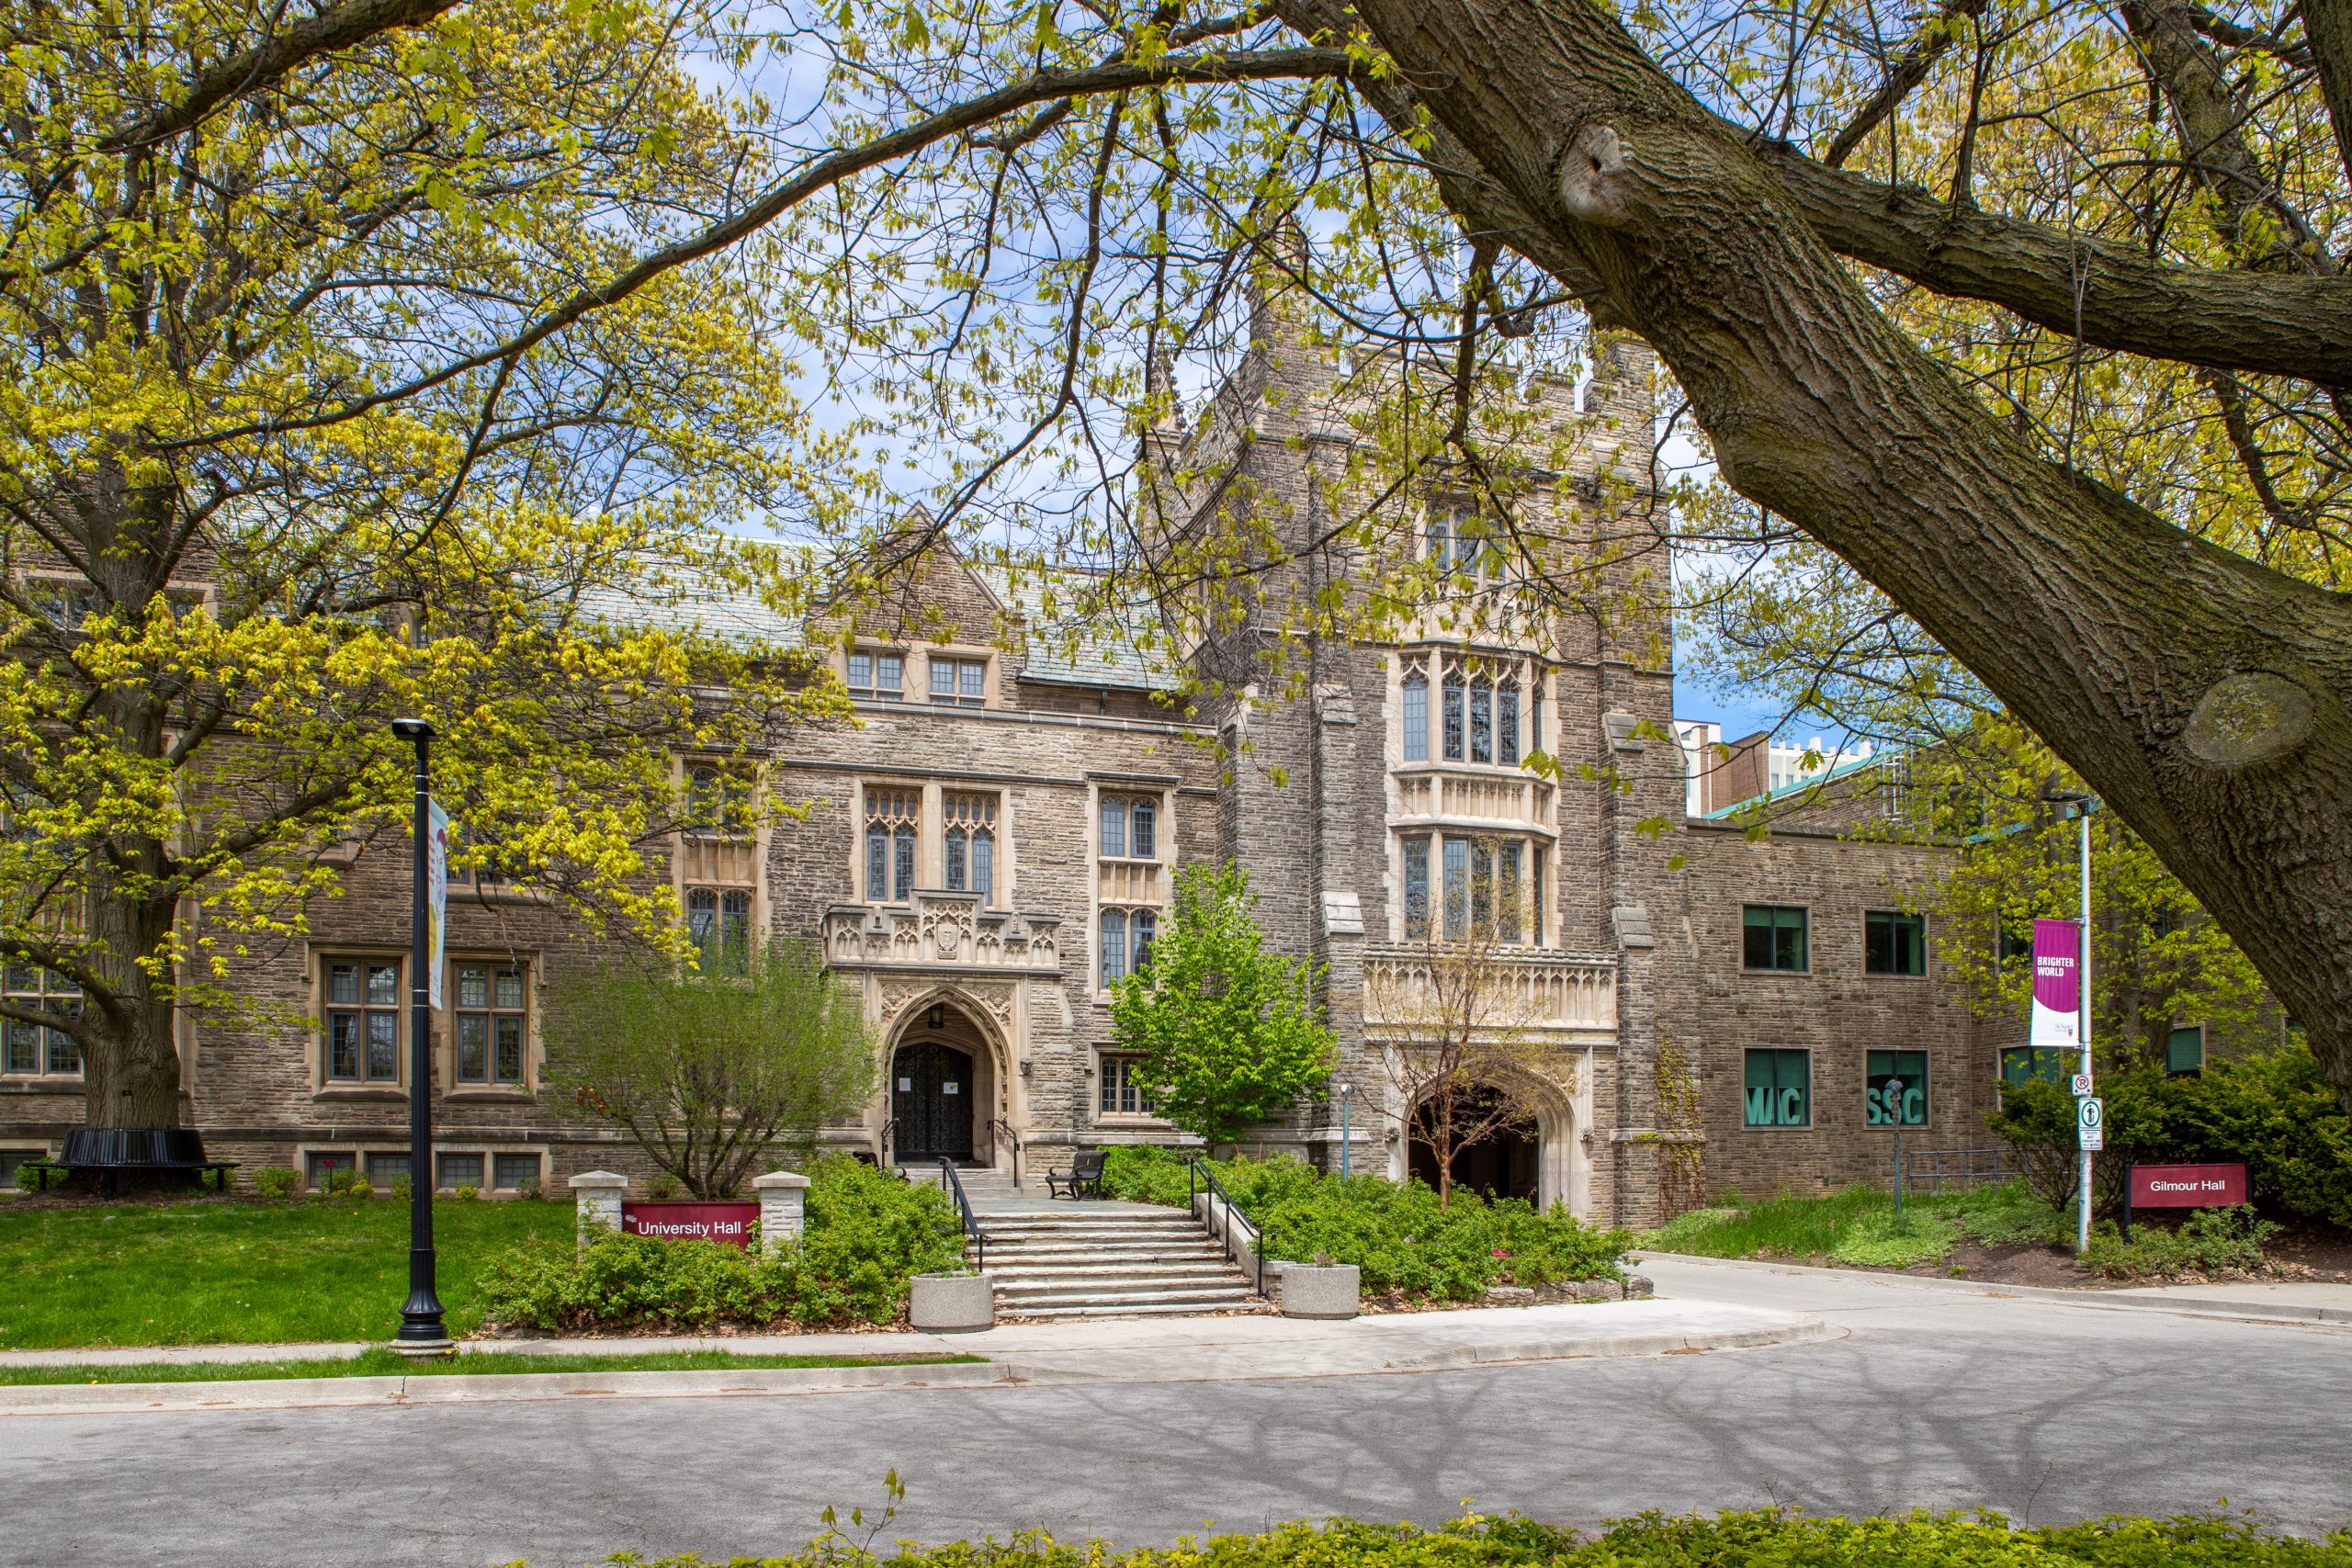 Exterior of University Hall during spring.